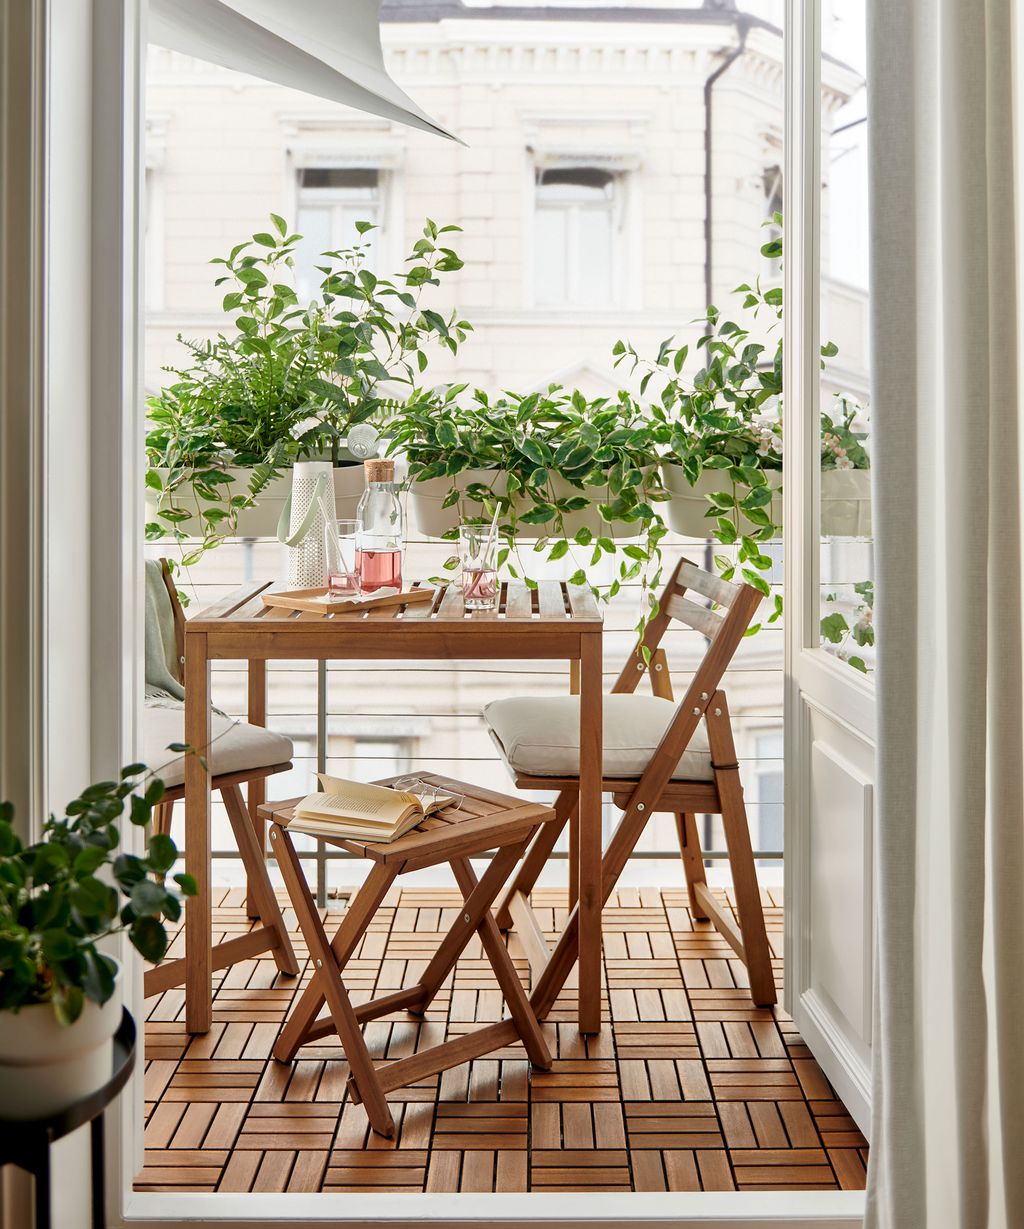 Balcony privacy ideas: 9 ways to screen it from view